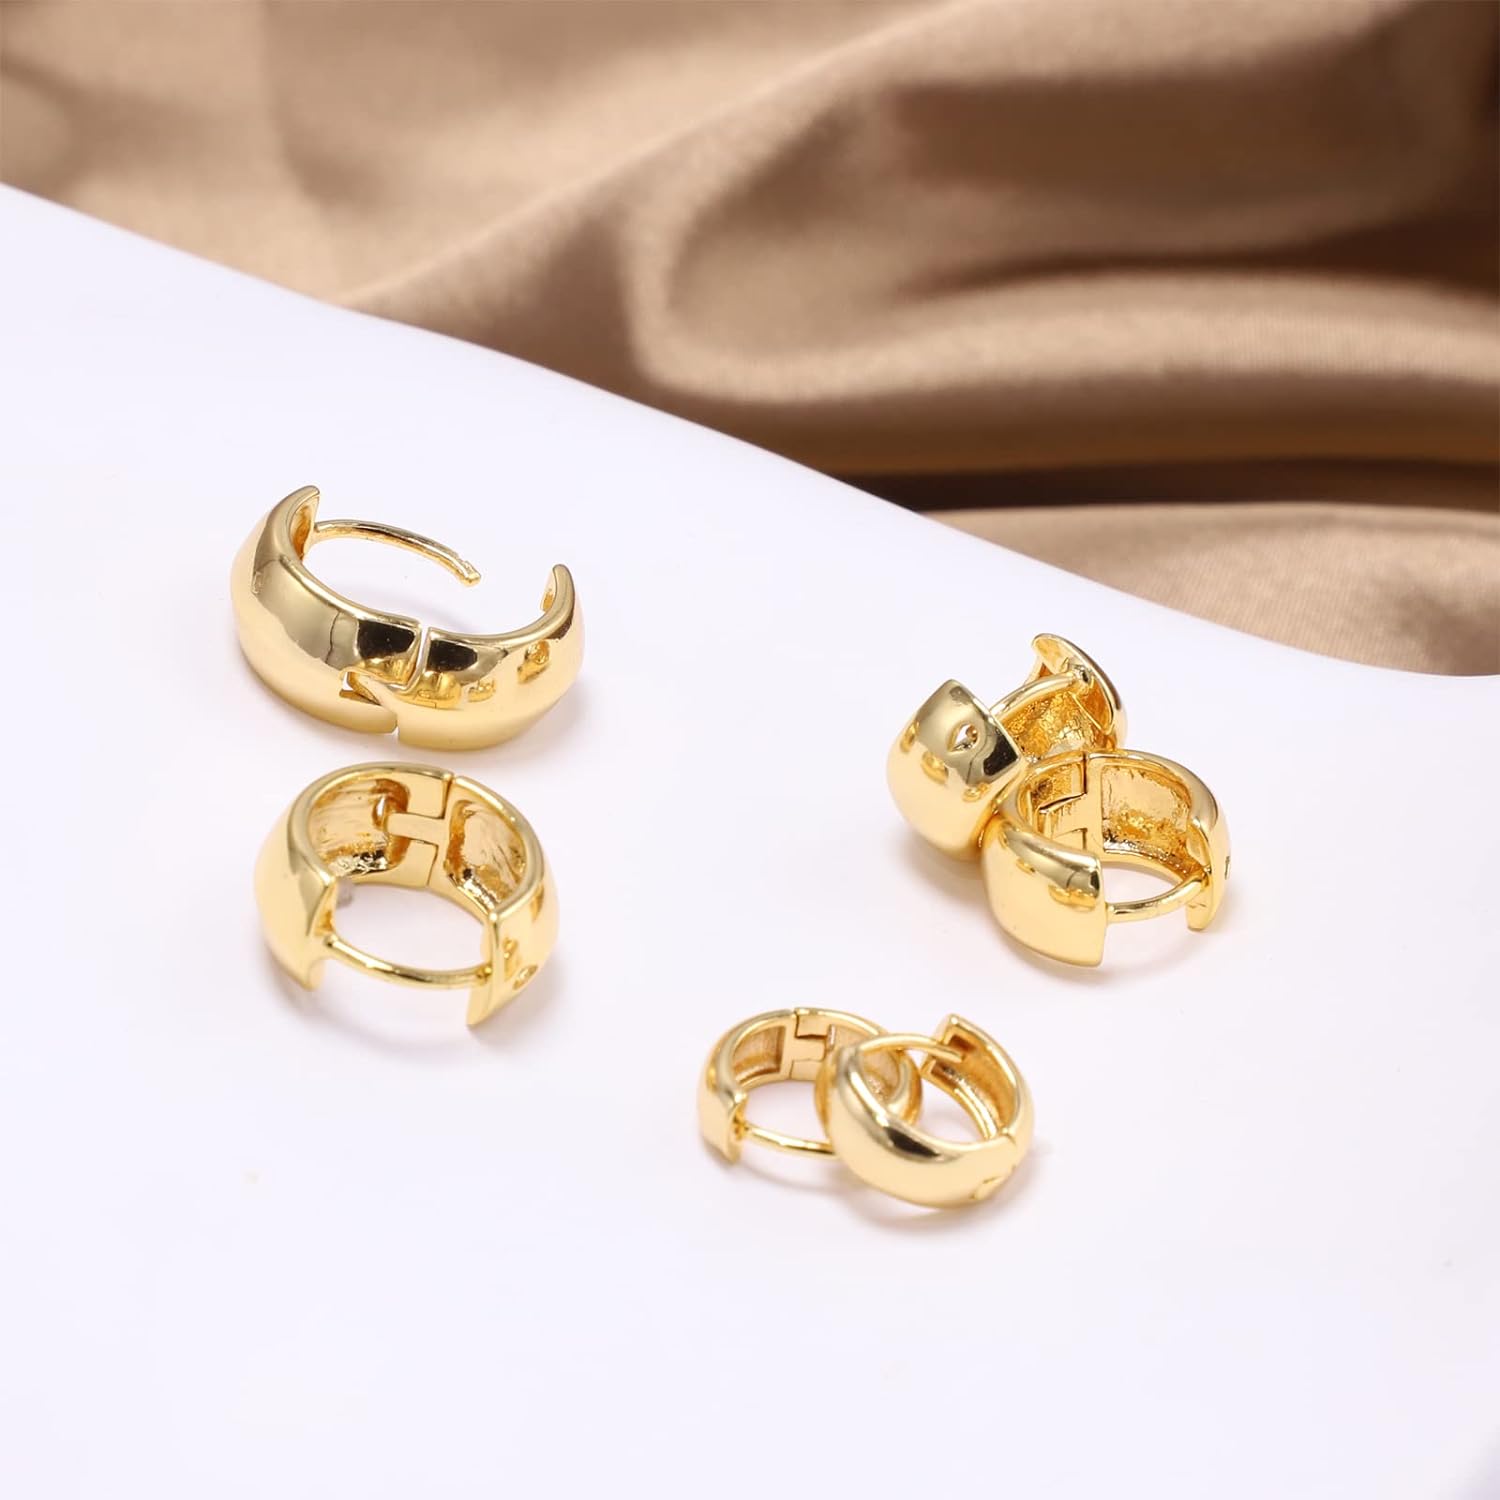 3 pairs of my Hoop Earrings Set are gold plated 18k for women and girls, hypoallergenic, Small Hoop Earrings